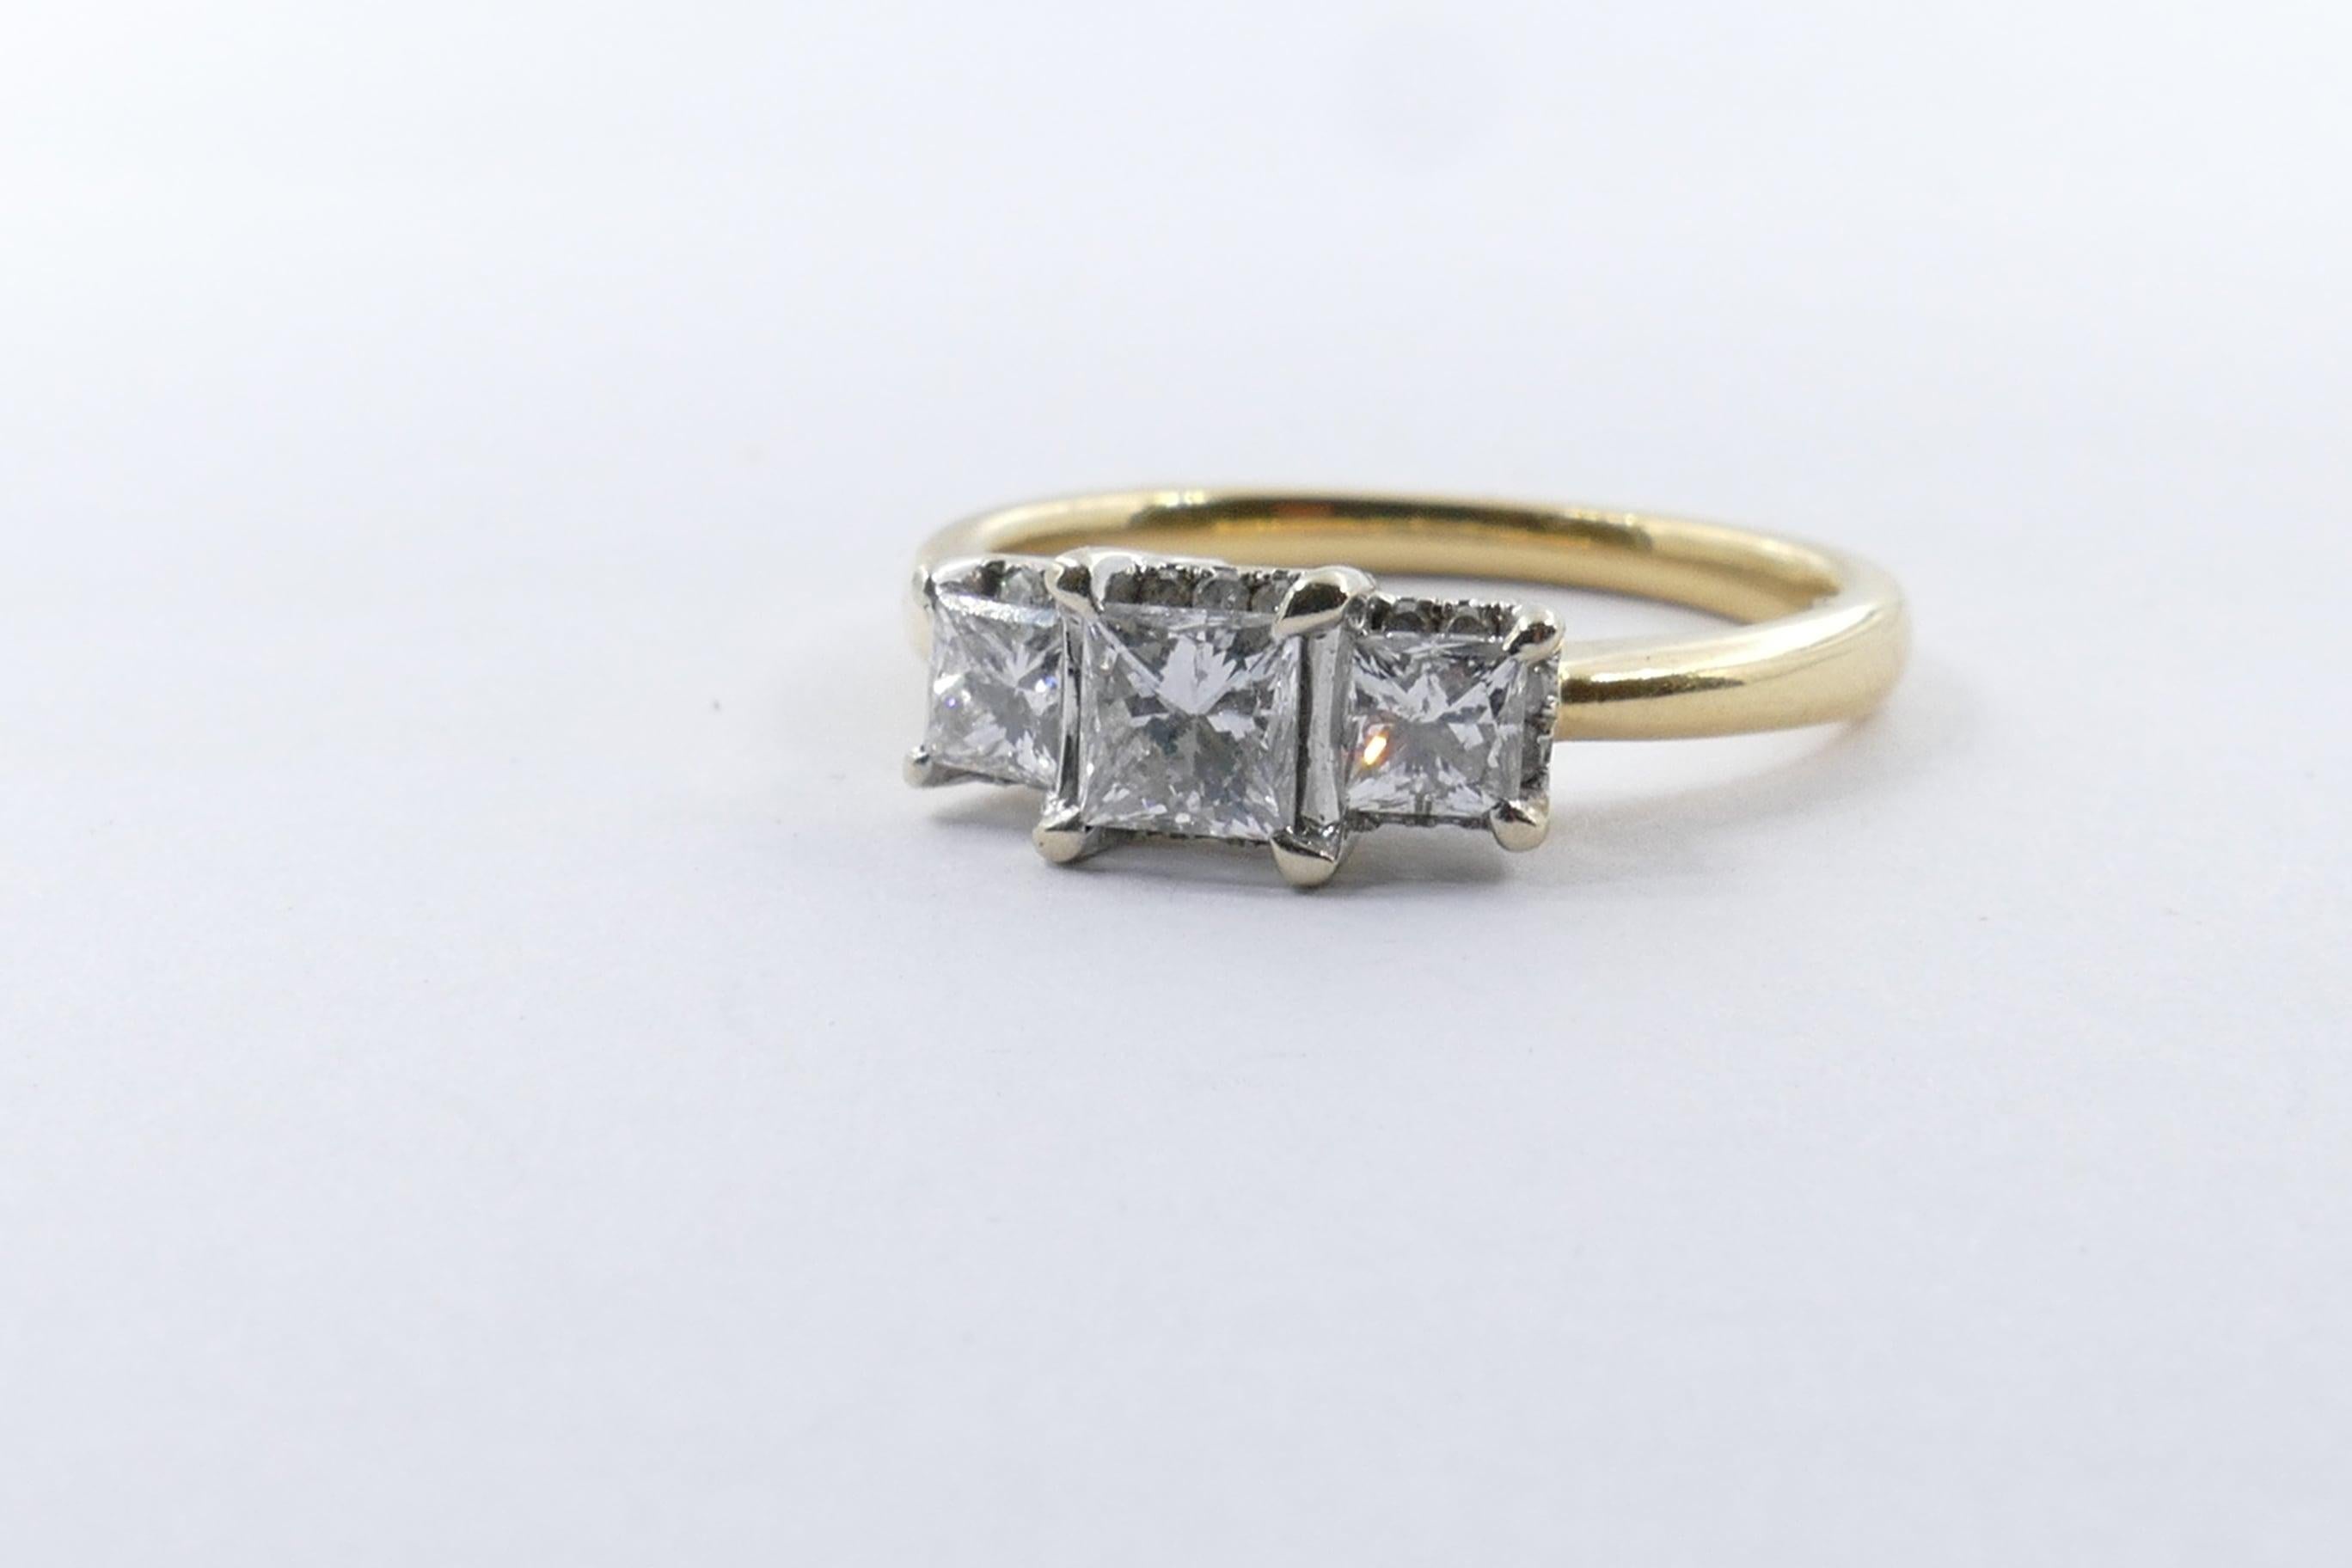 A Princess Cut near half carat Diamond, colour G, clarity SI1, 4 claw set is flanked by 2 other high quality Princess Cut Diamonds  totalling near half carat as well. Their colour is G, clarity SI1 to create  a very attractive 3 Stoner Ring.
The